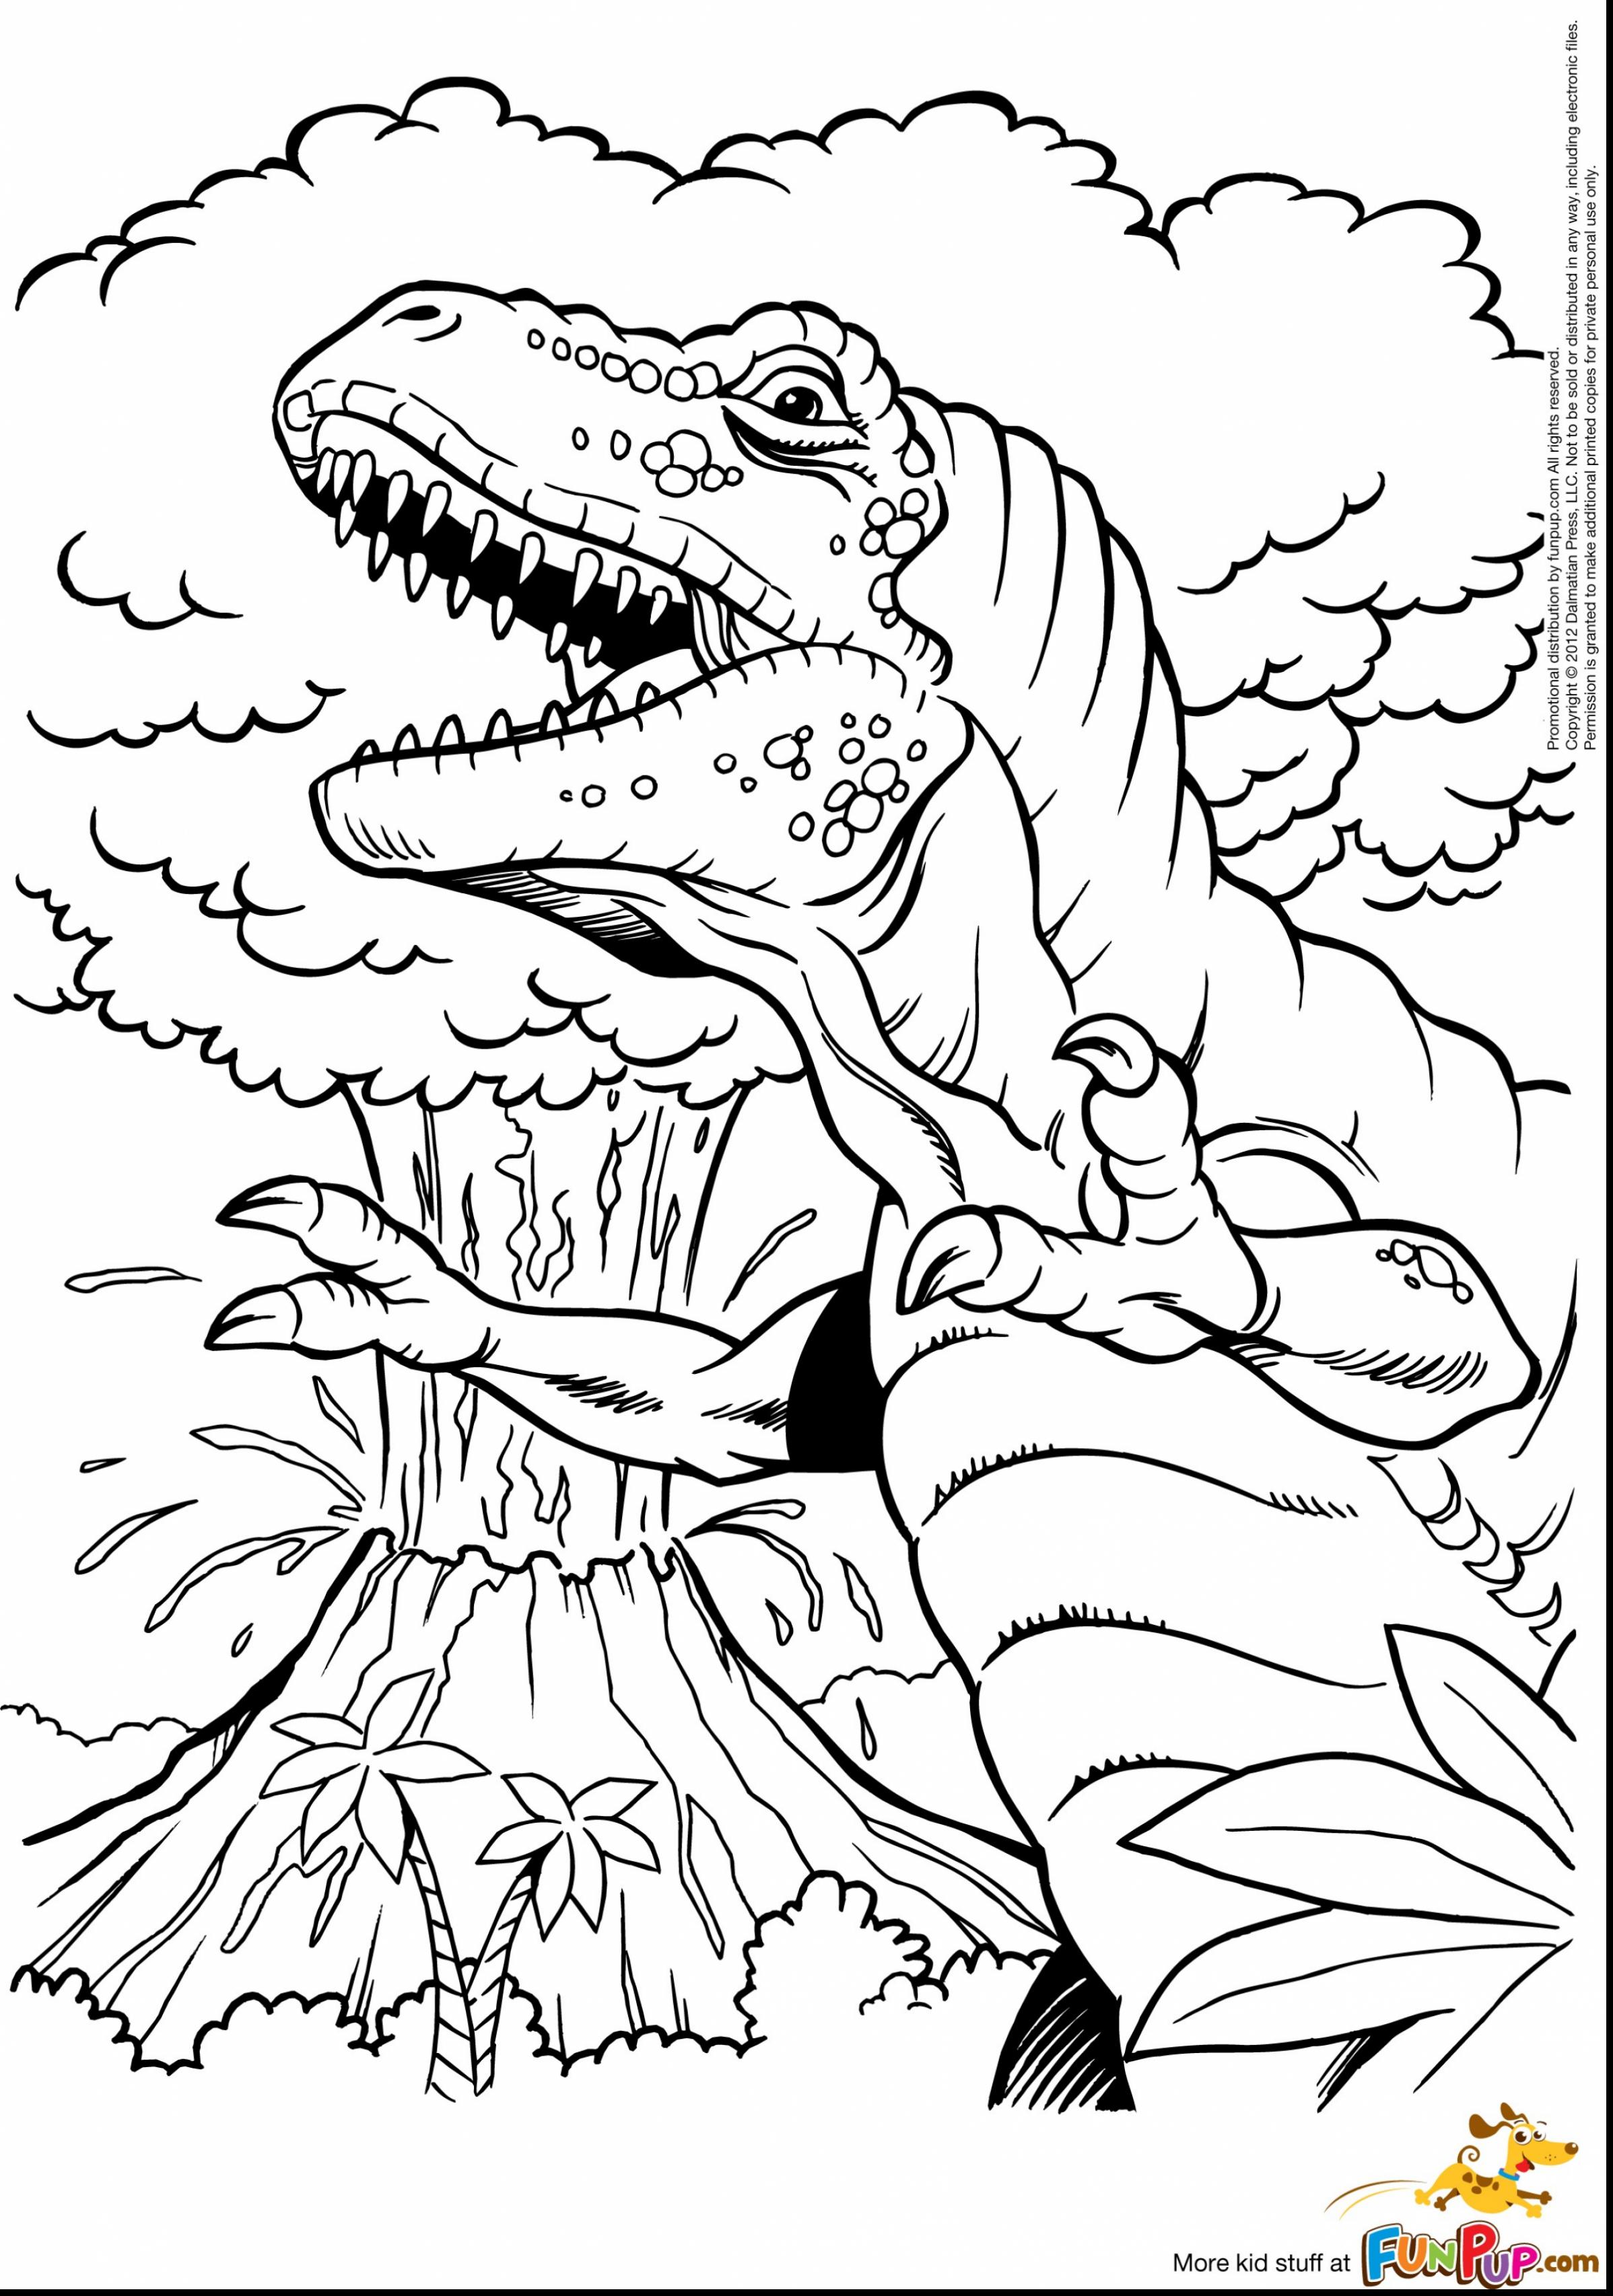 T Rex Coloring Page at GetDrawings | Free download